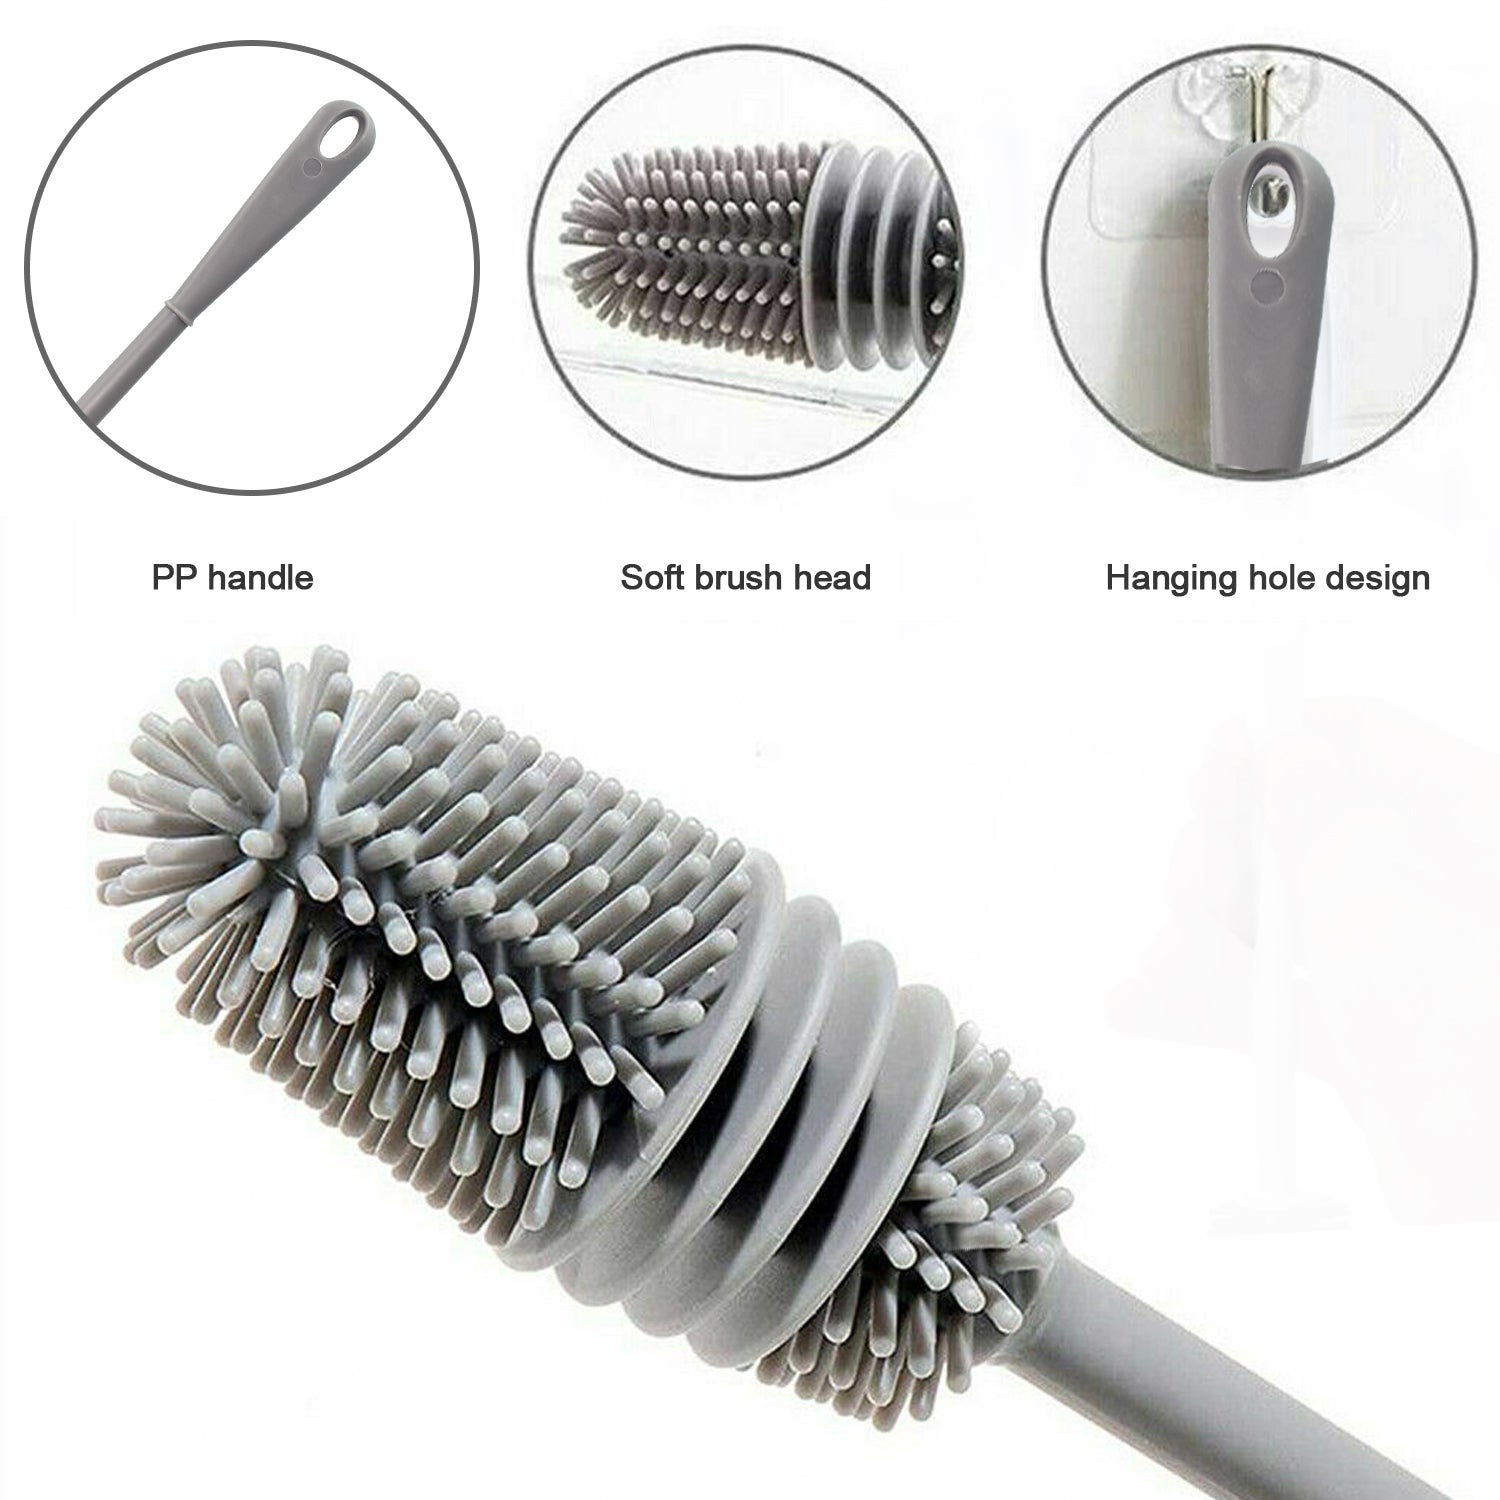 6151 Bottle Cleaning Brush widely used in all types of household kitchen purposes for cleaning and washing bottles from inside perfectly and easily. DeoDap